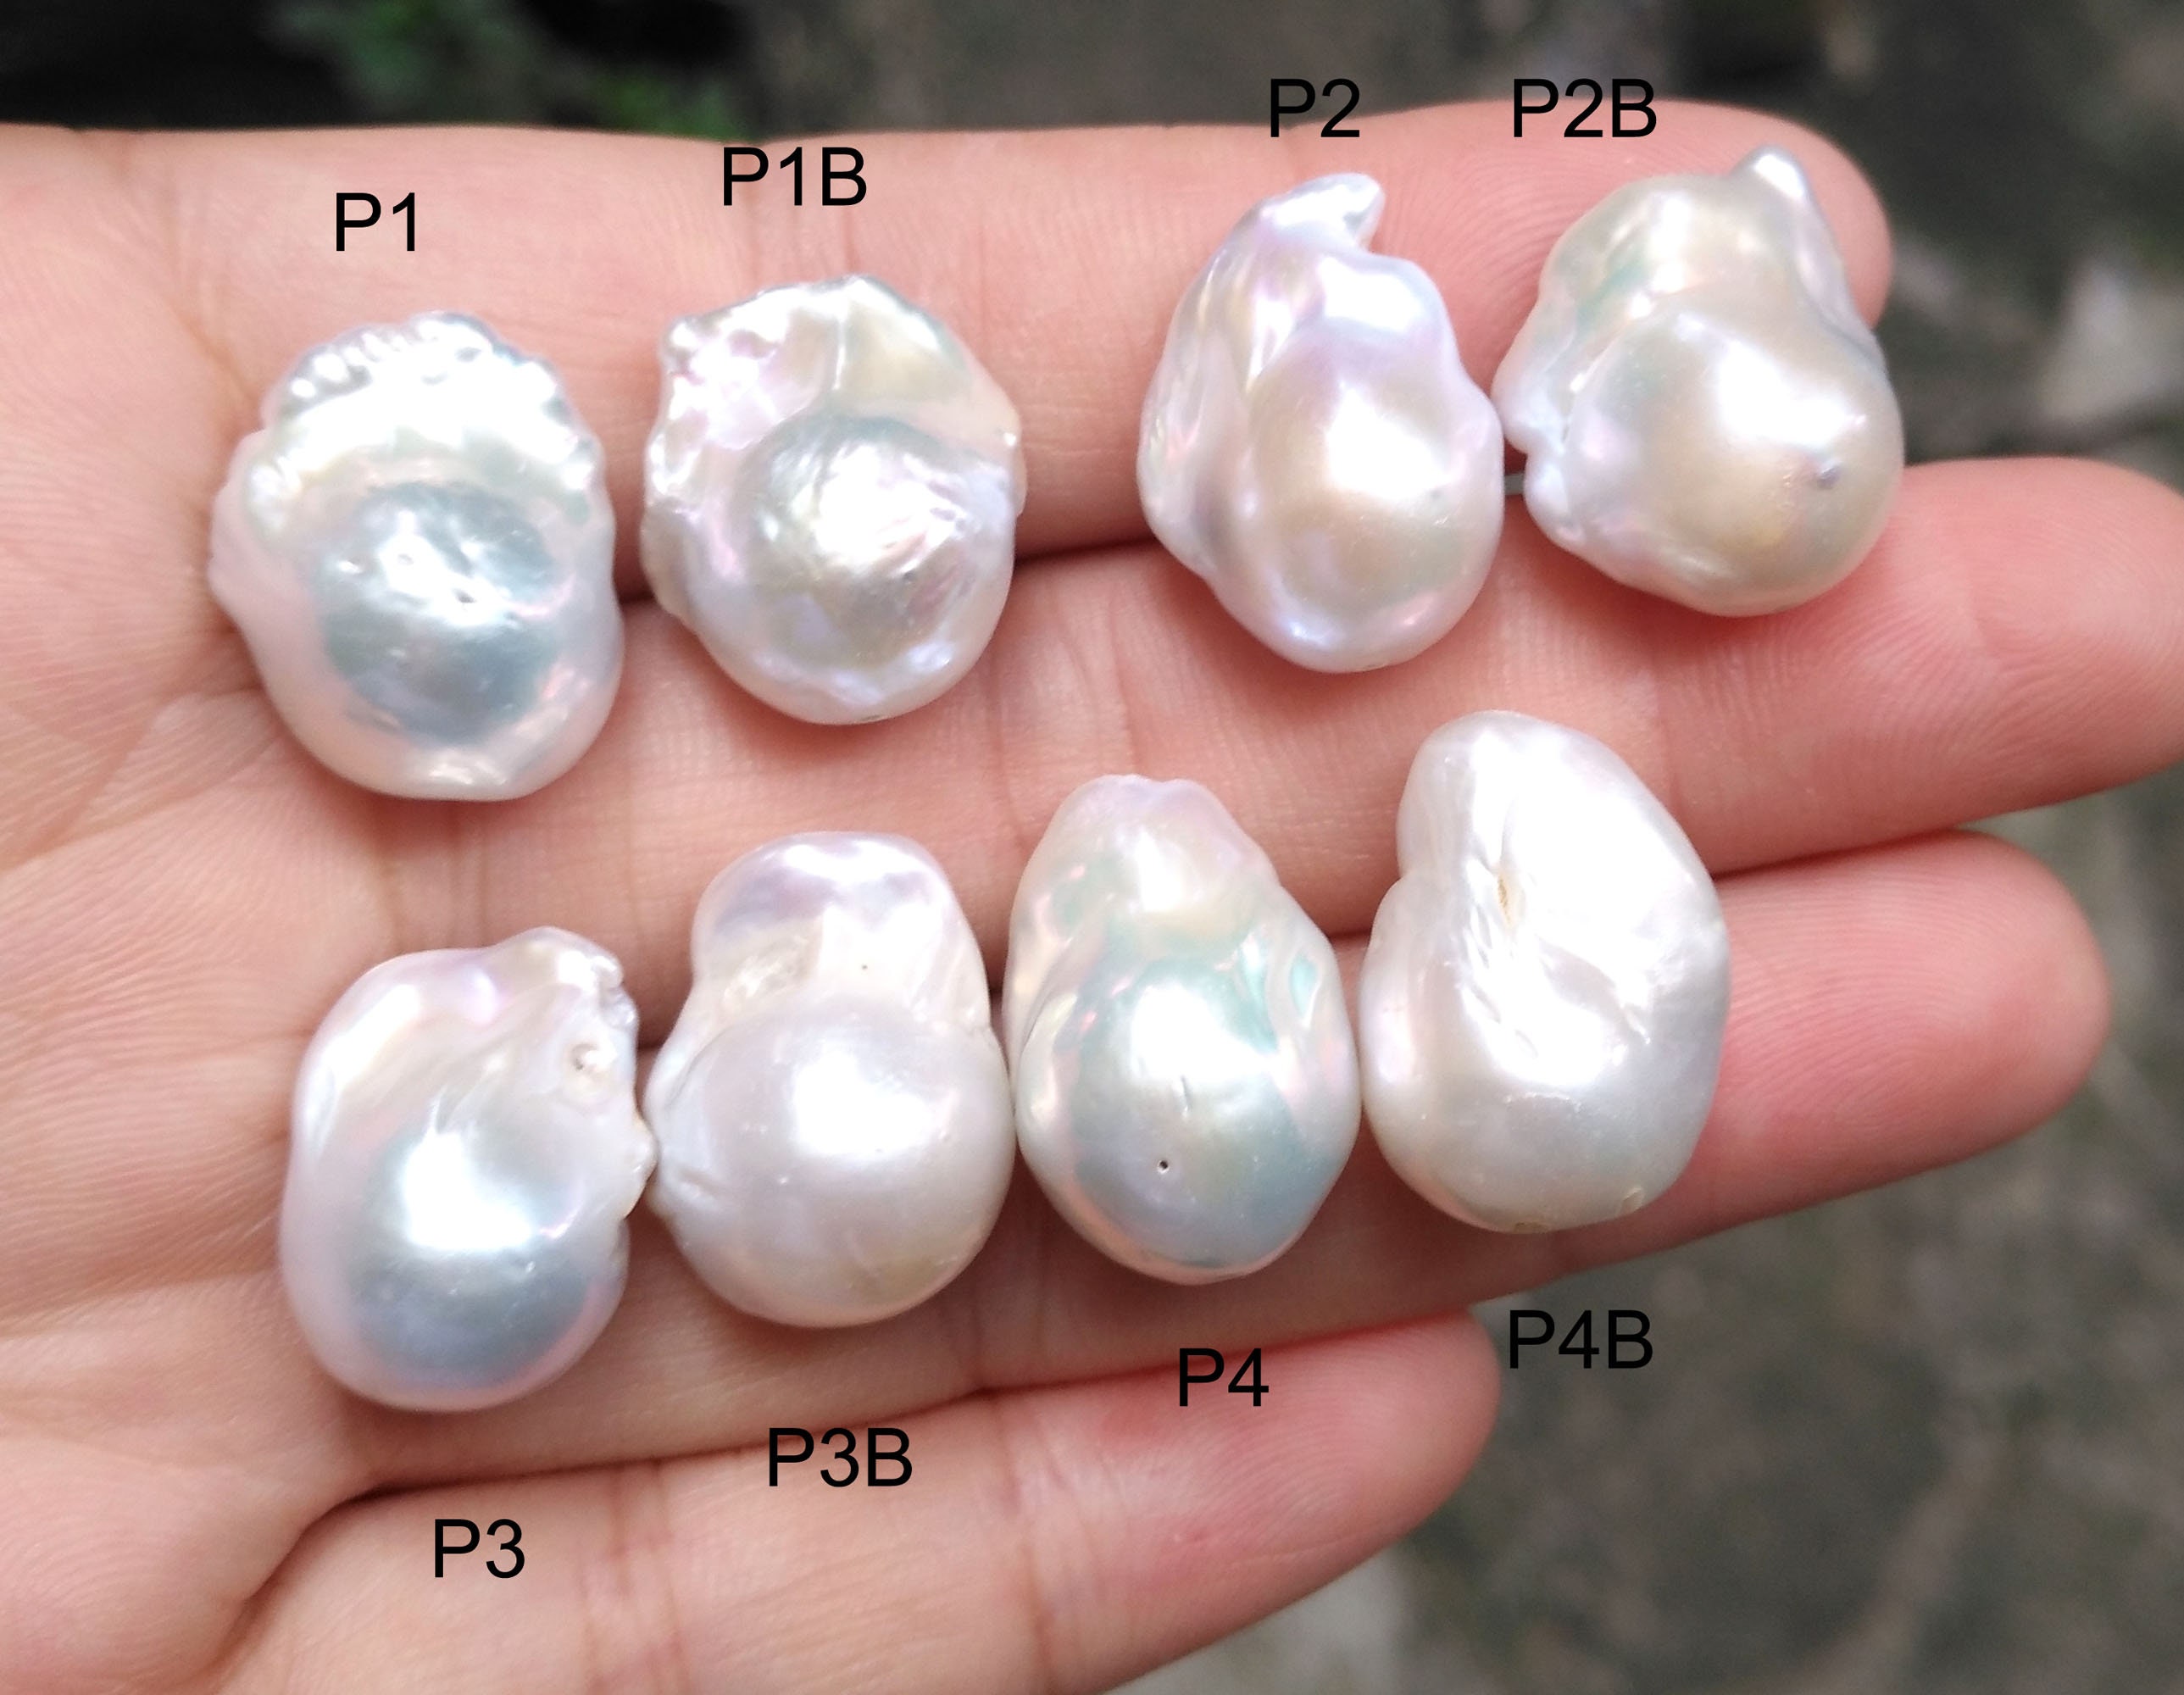 10-16mm rough pearl, fully drilled, natural pearl beads, PB1941